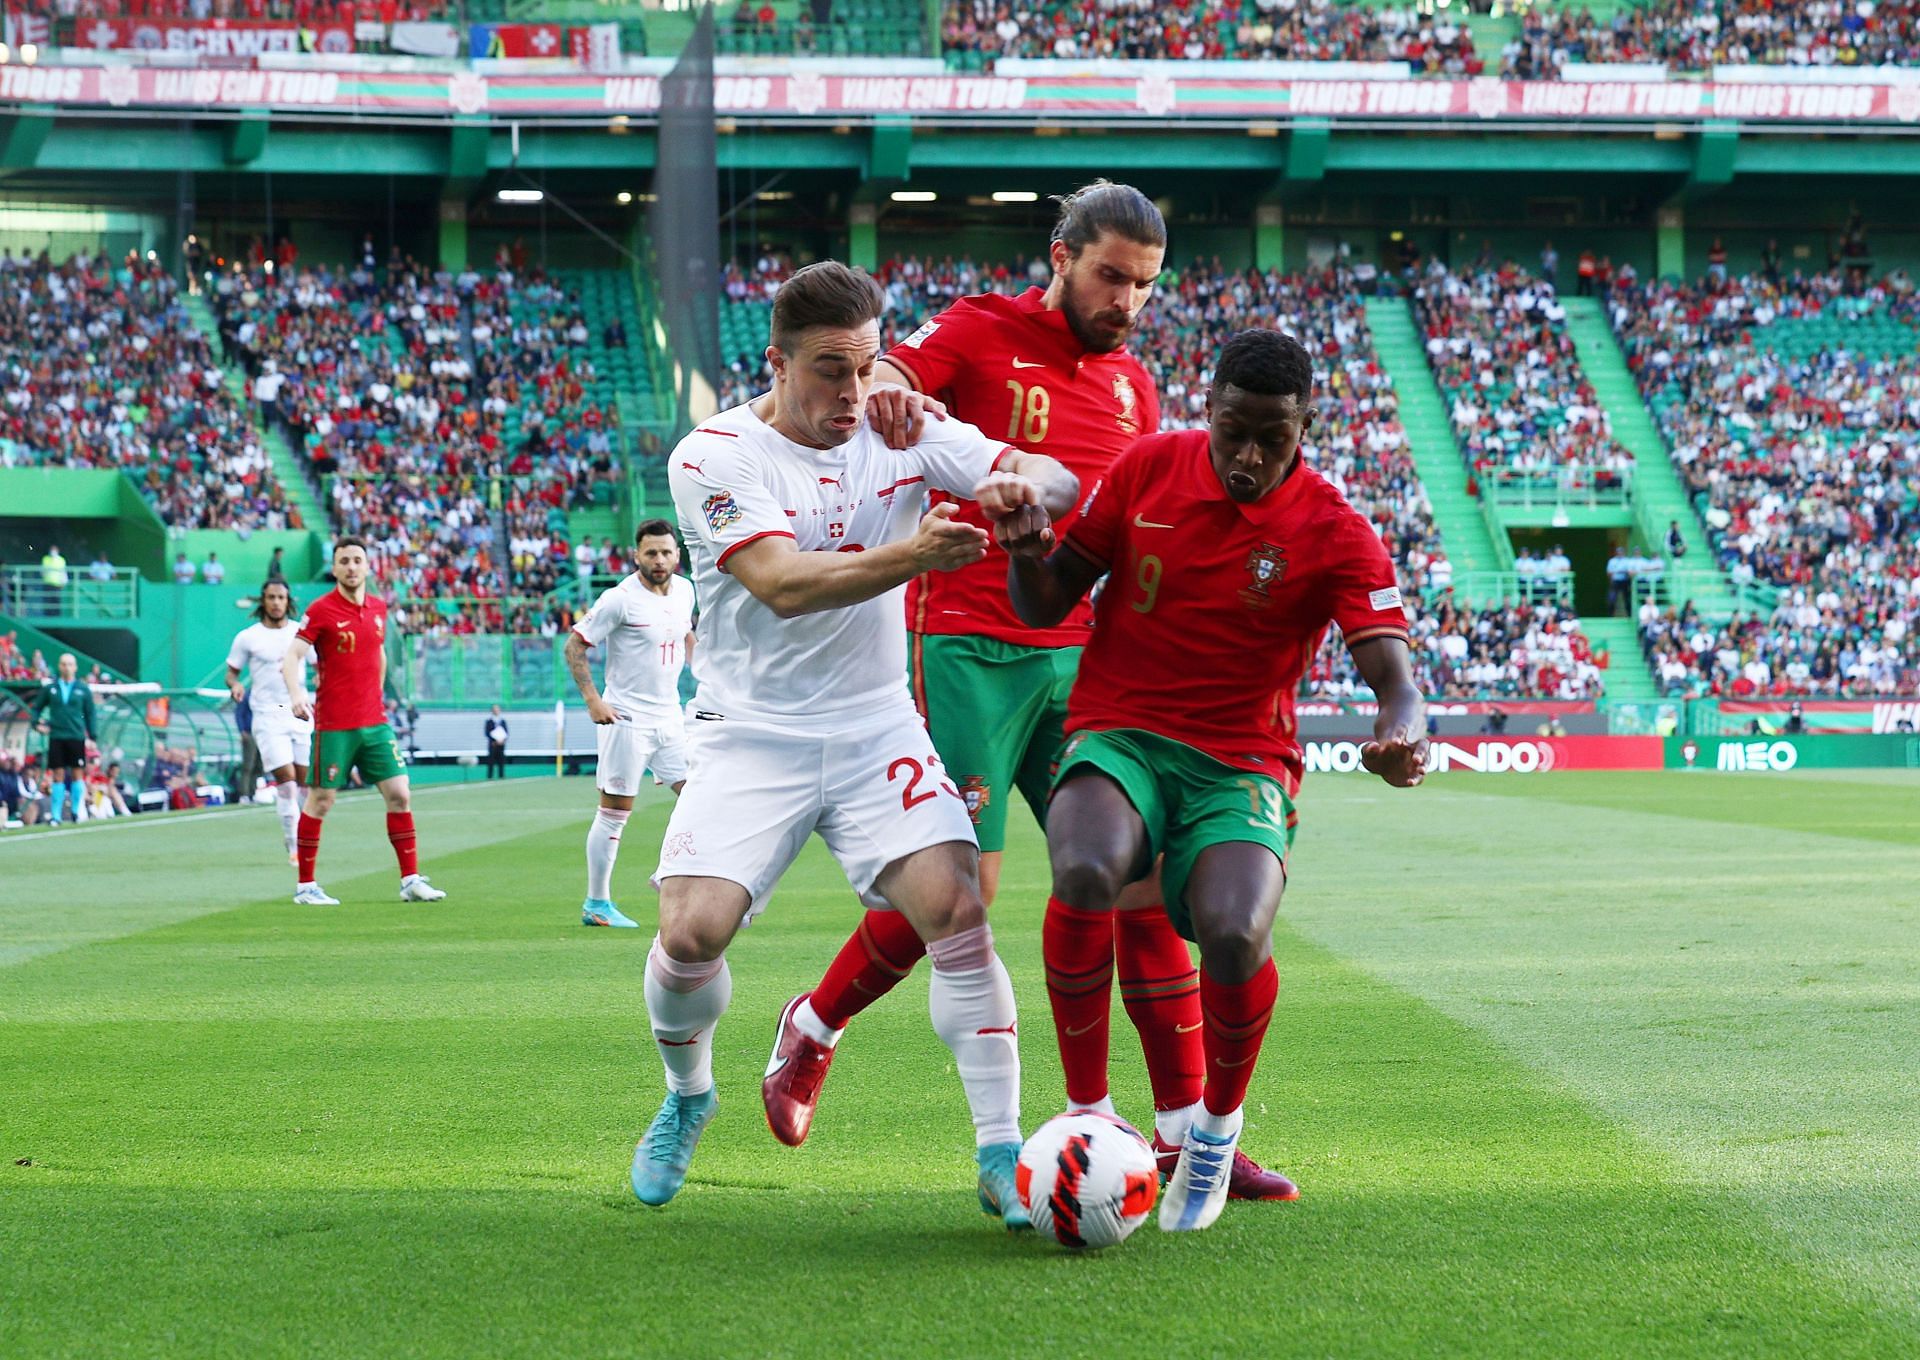 Portugal face first loss of the campaign against Switzerland.